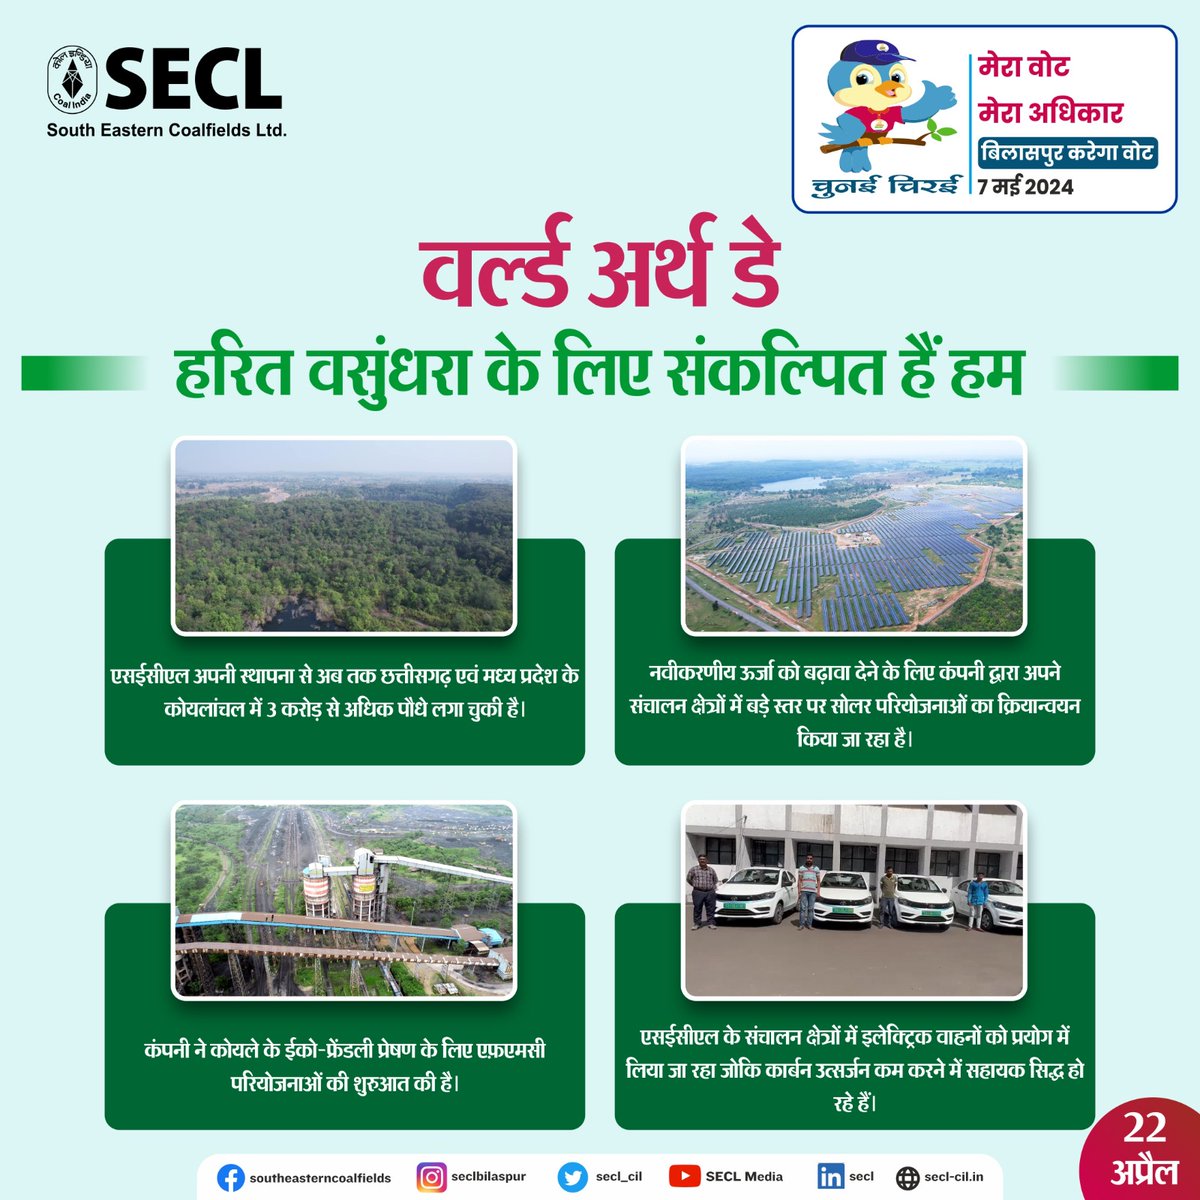 At SECL, we are continuously striving for a green and sustainable earth. 

@CoalMinistry @CoalIndiaHQ @ECISVEEP @CEOChhattisgarh @BilaspurDist @KorbaDist @RaigarhDist 

#teamsecl #coalindia #WorldEarthDay2024